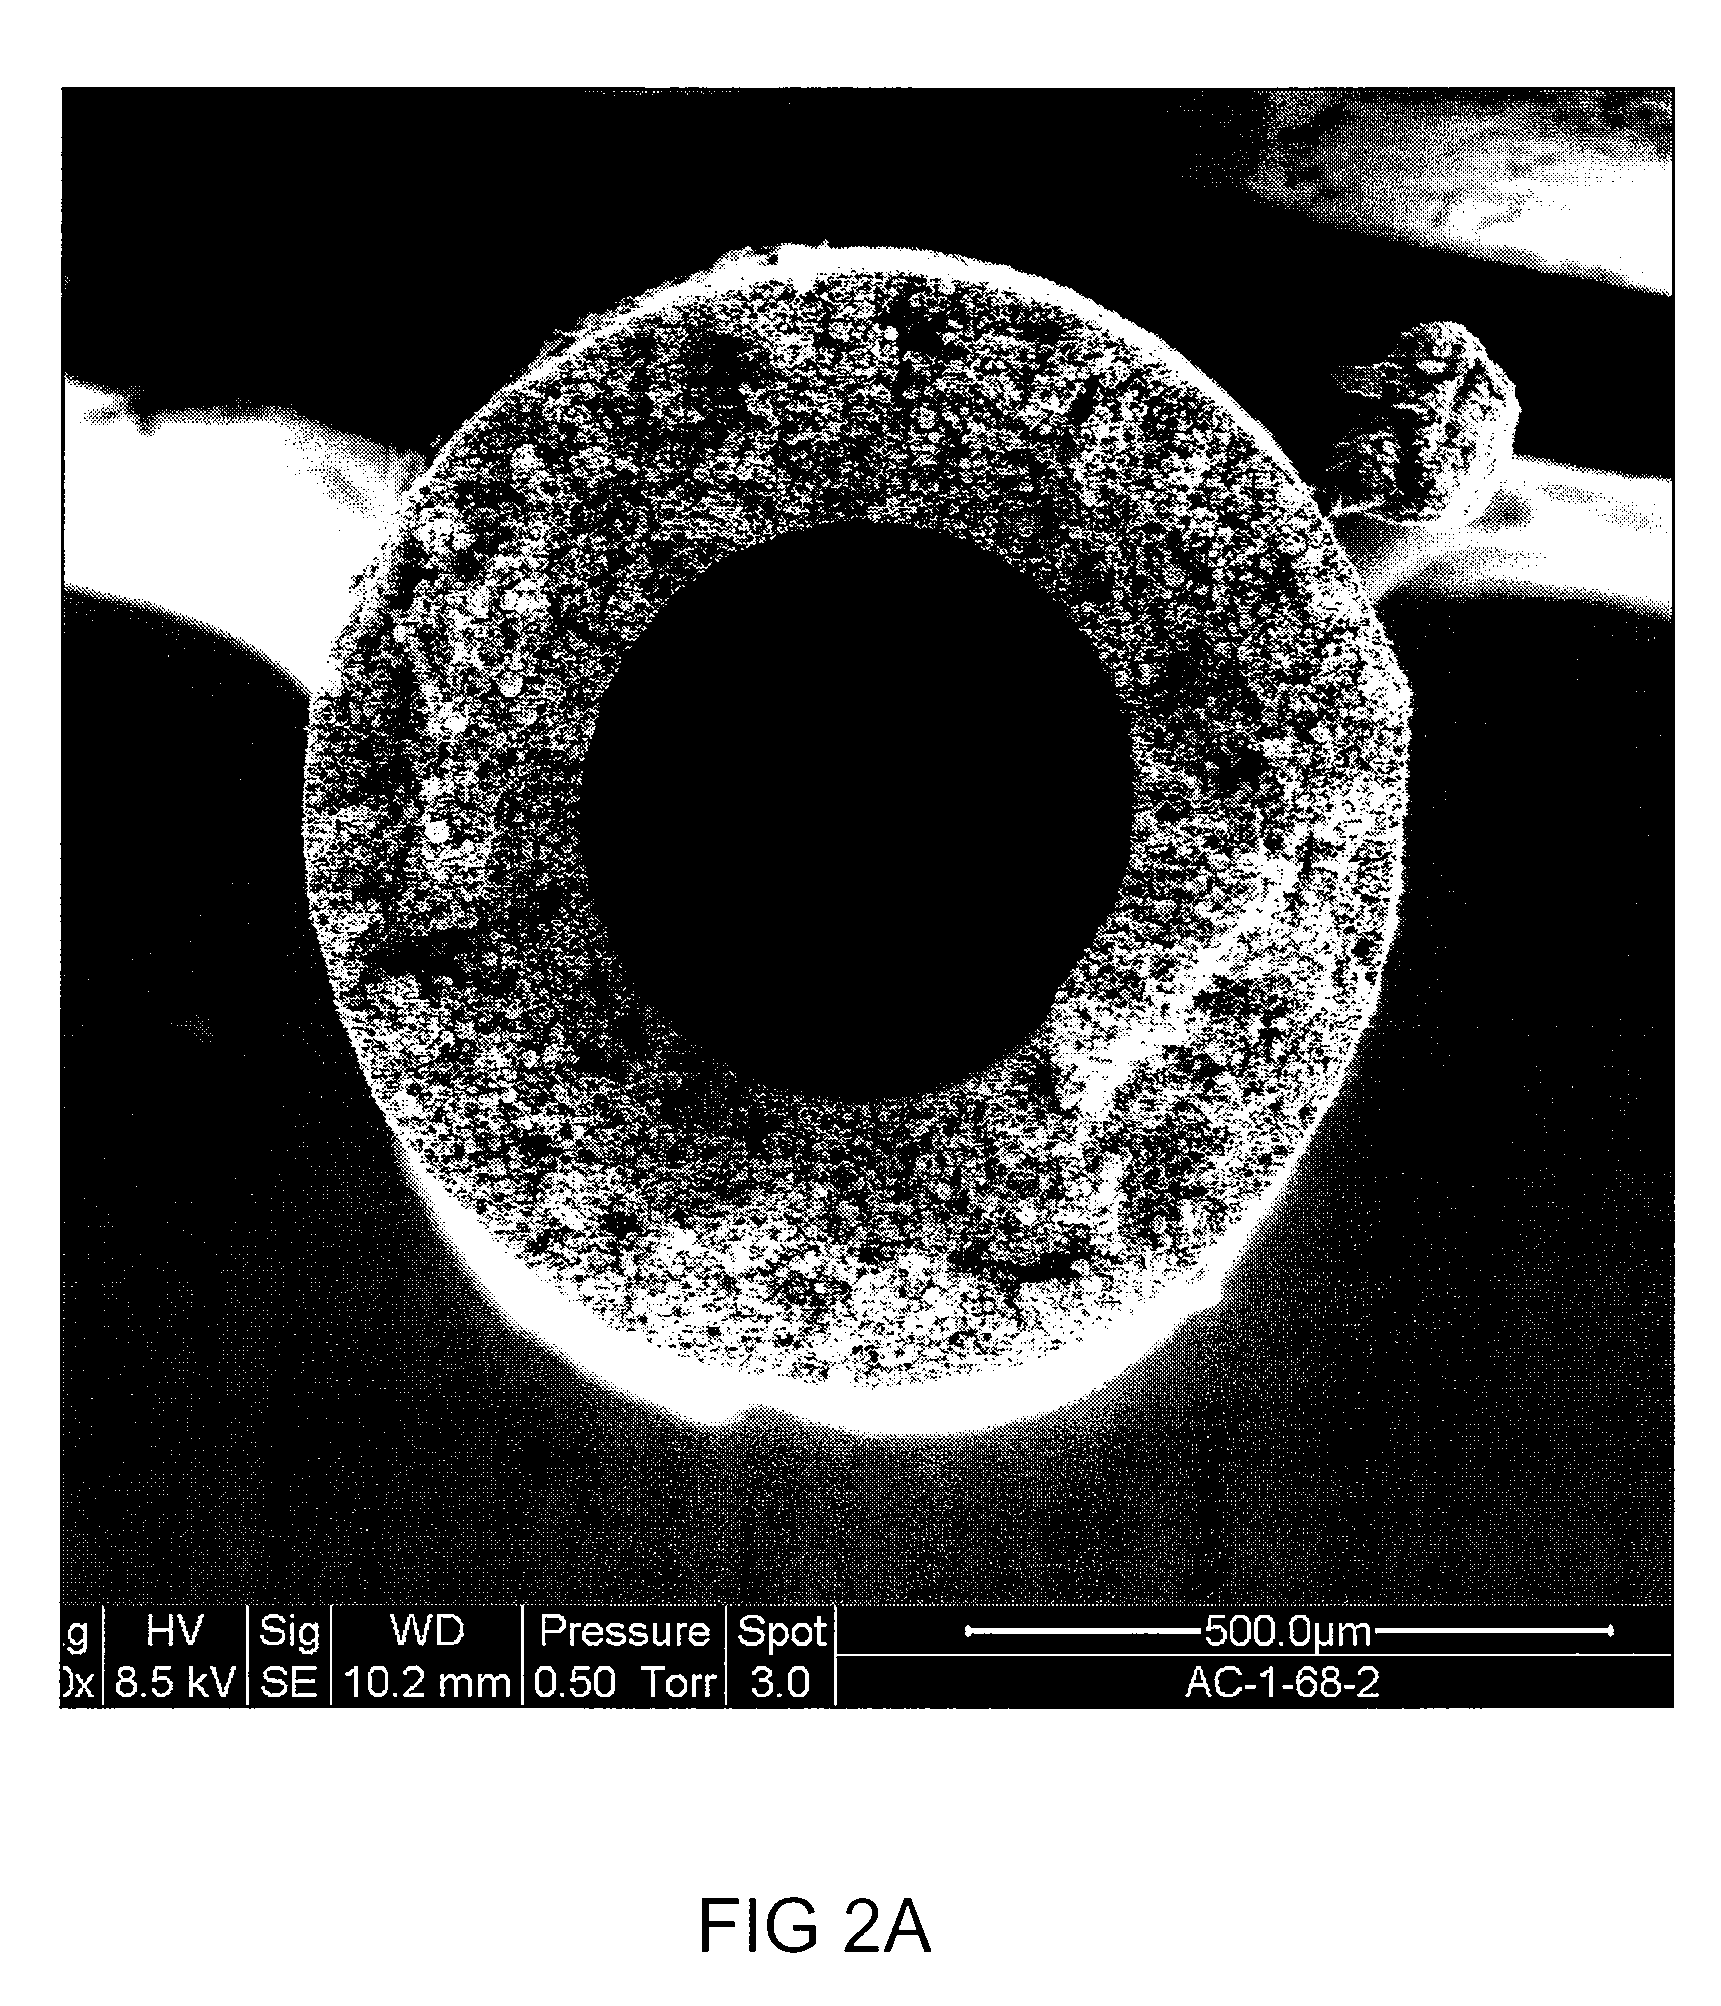 Hollow Organic/Inorganic Composite Fibers, Sintered Fibers, Methods of Making Such Fibers, Gas Separation Modules Incorporating Such Fibers, and Methods of Using Such Modules